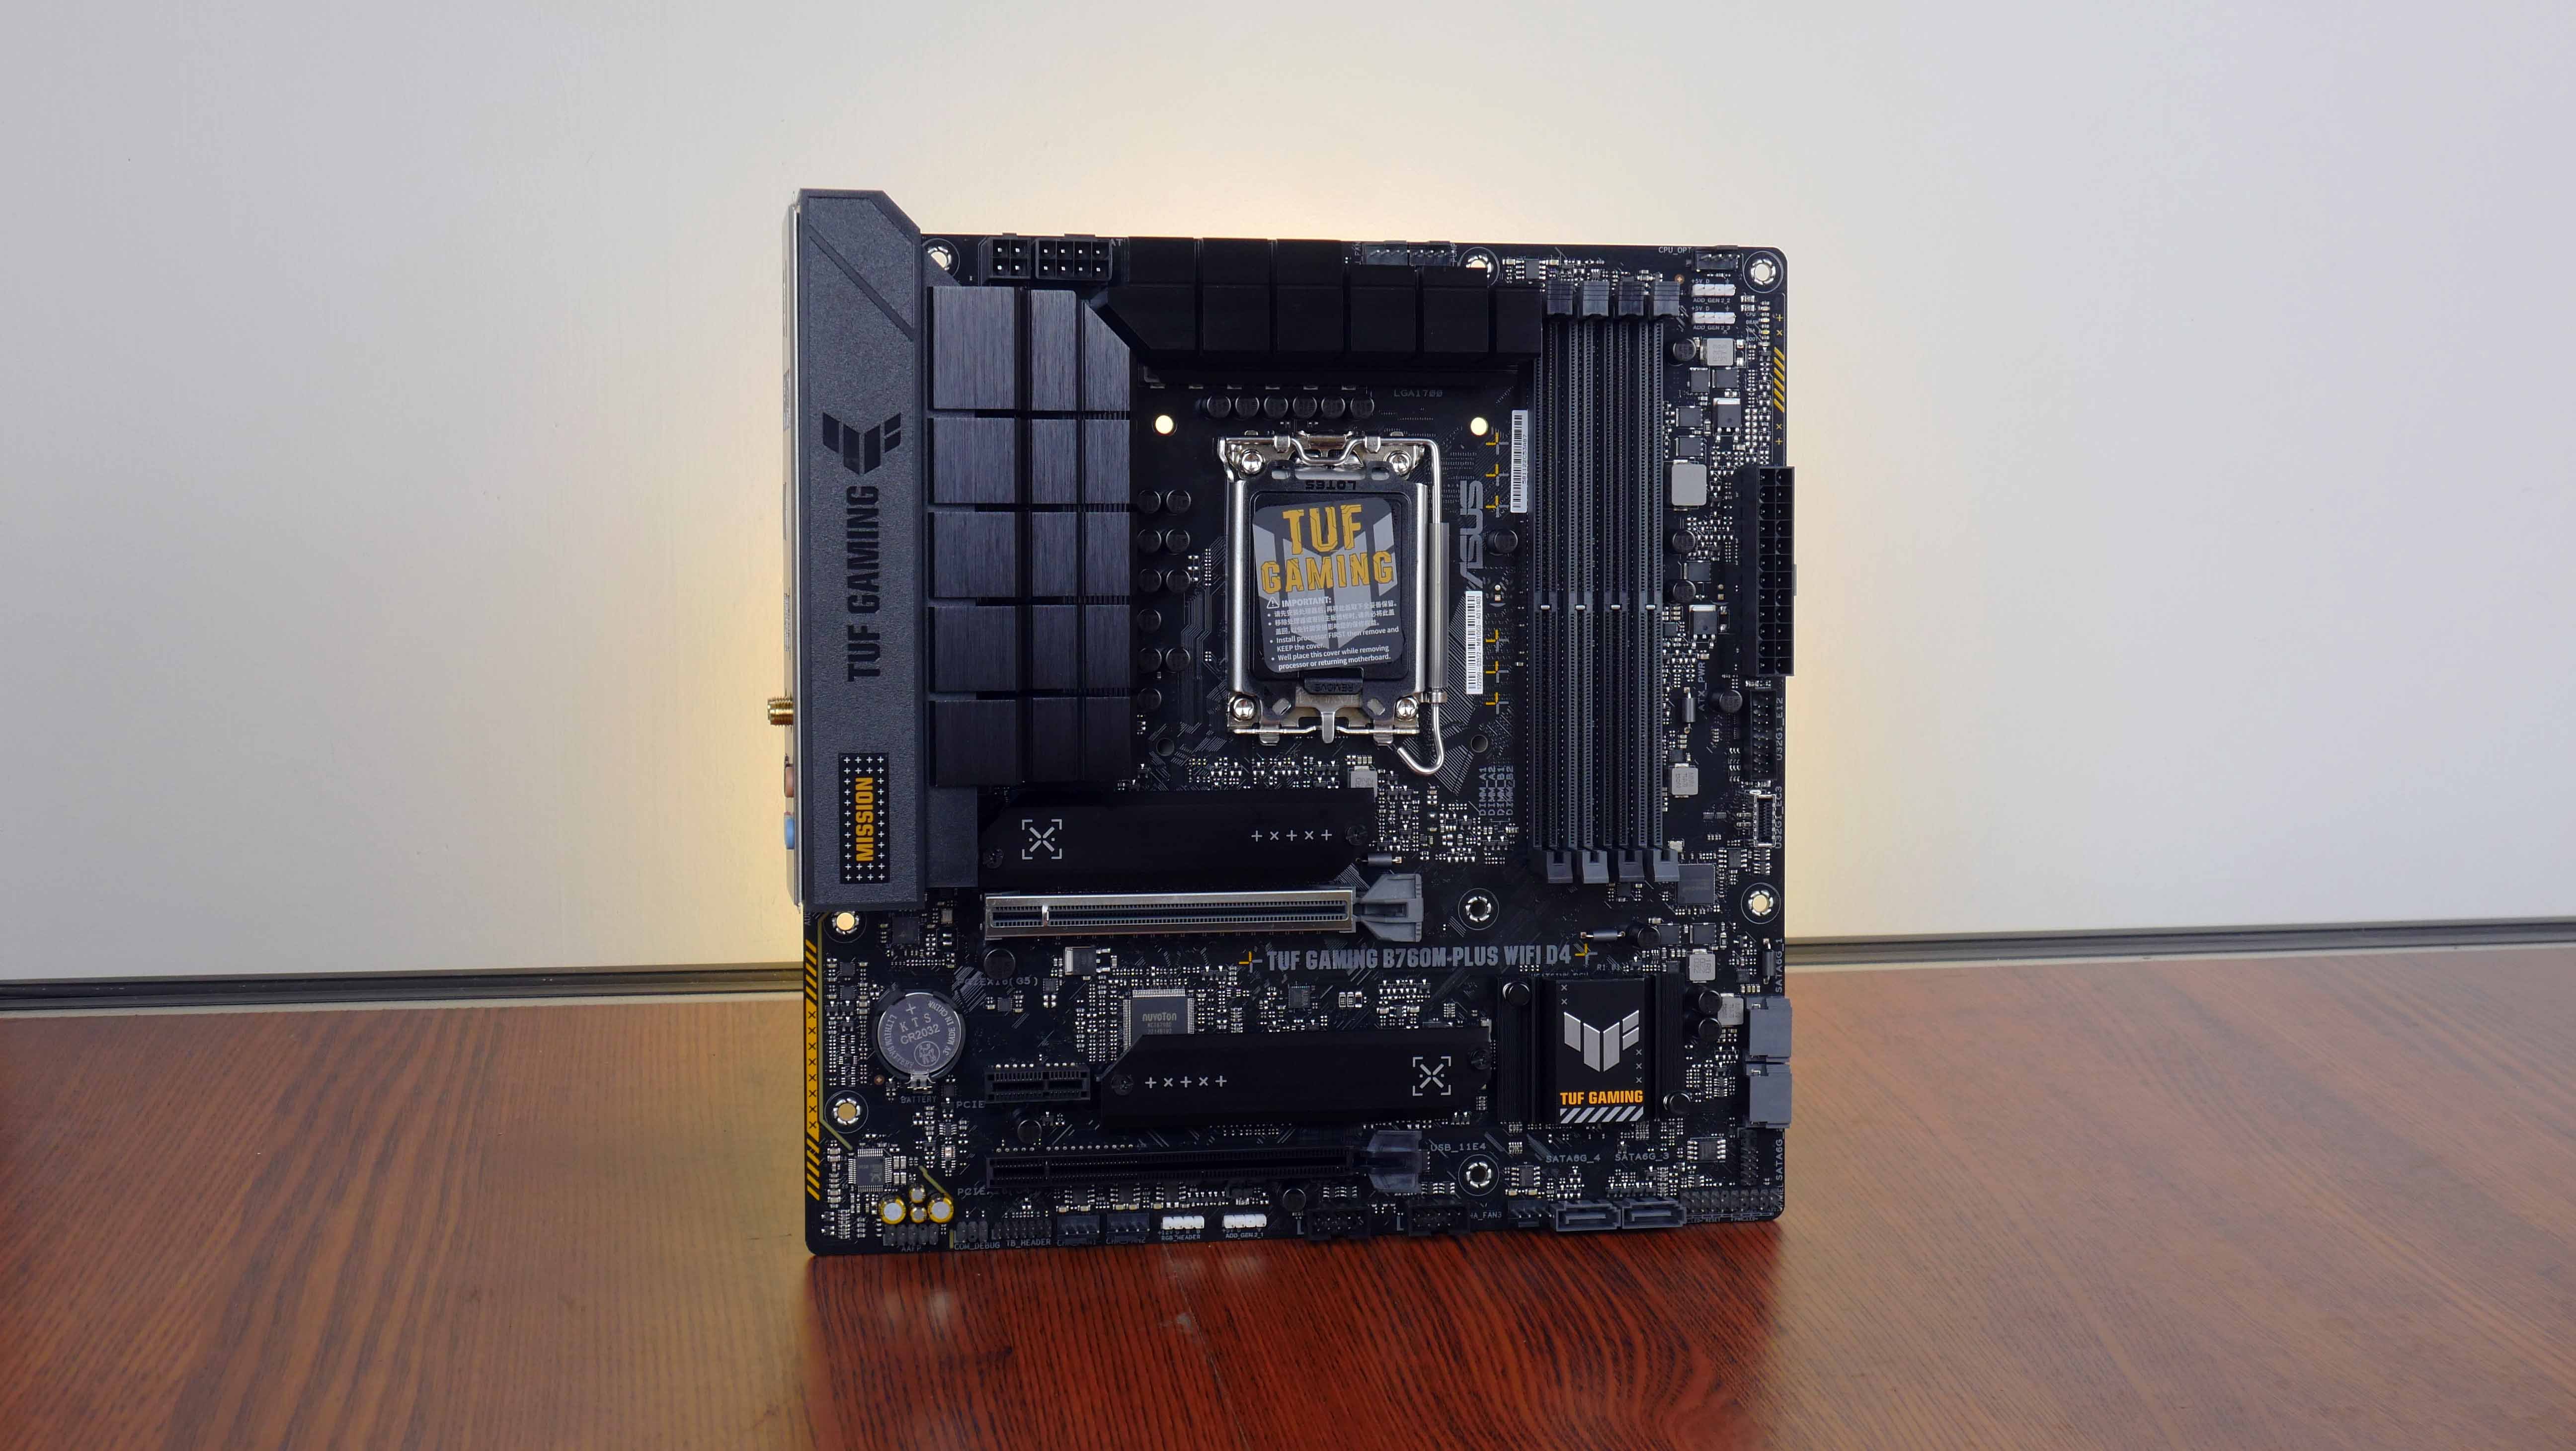 Intel B760 Motherboard for Gamers on a Budget - ASUS TUF GAMING B760-PLUS  WIFI D4 